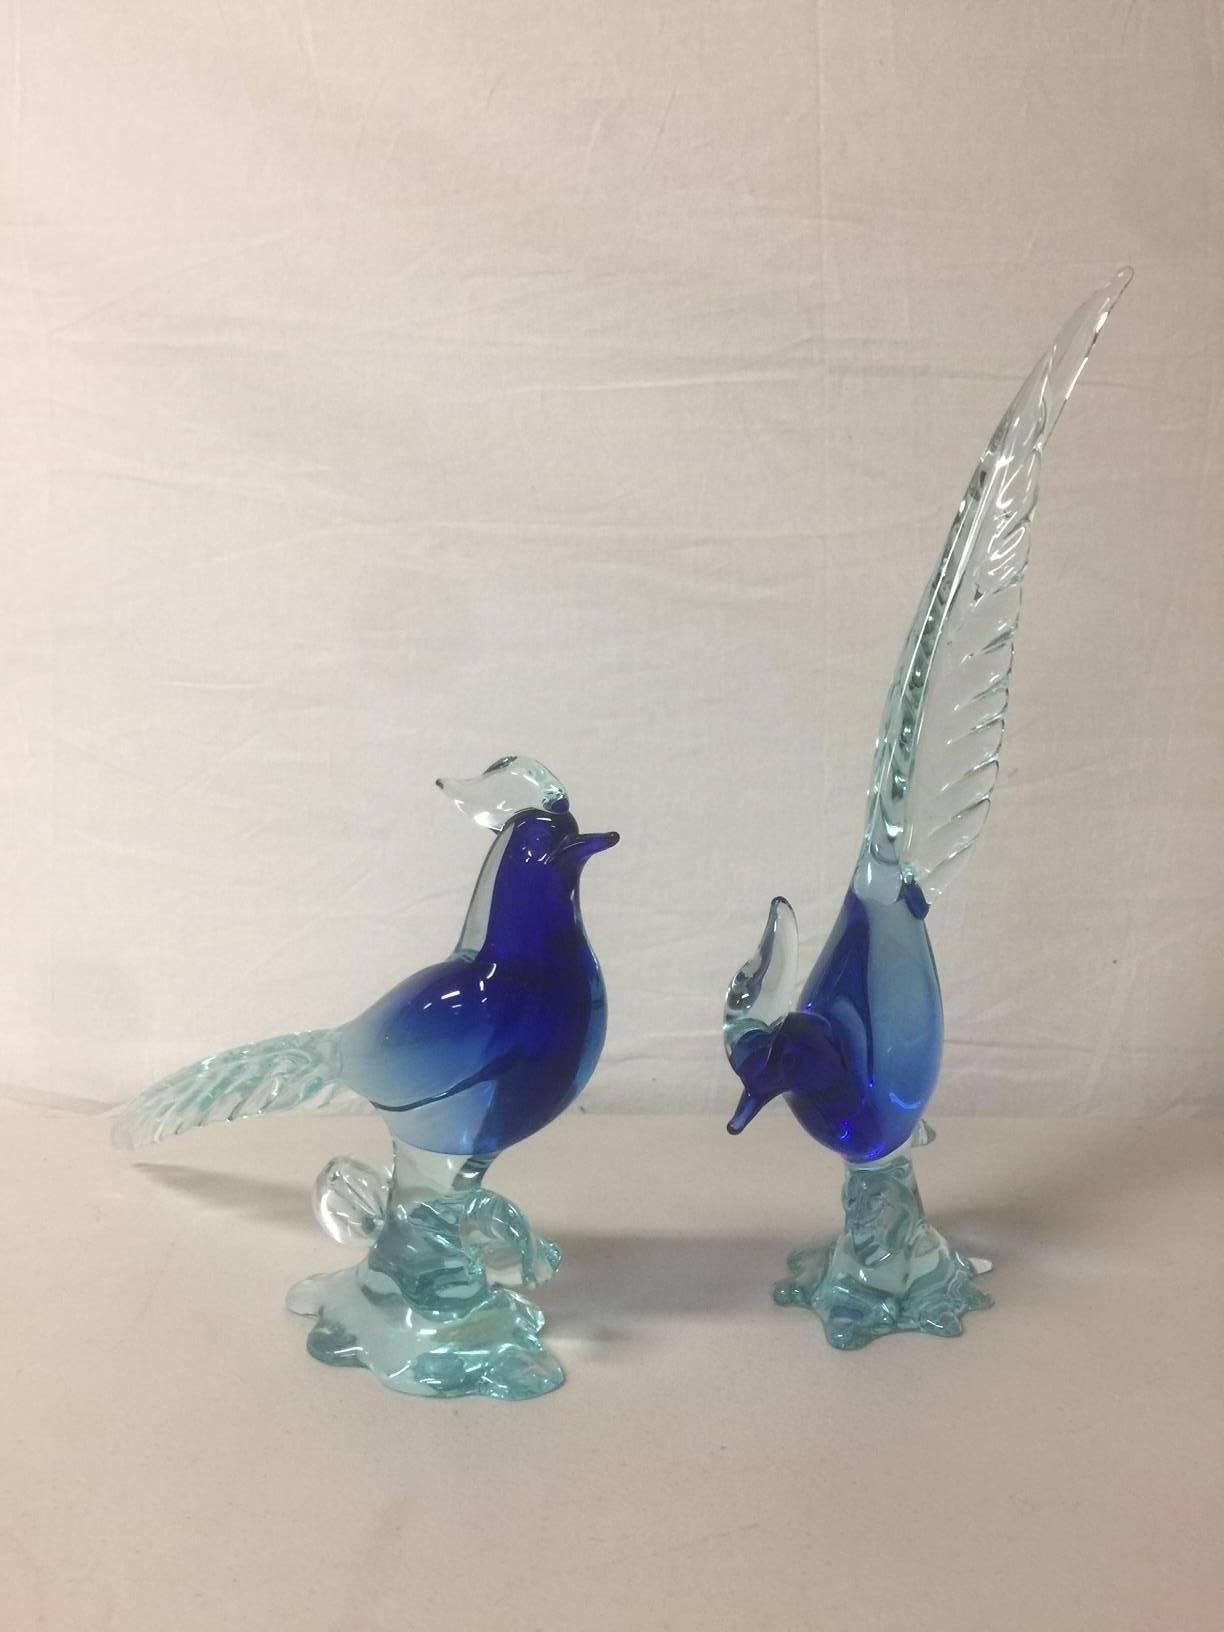 Nice pair of art glass birds/pheasants by Murano glass studios, circa 1960s in a blue / clear Sommerso style. Excellent condition with original Murano foil sticker attached to each bird.